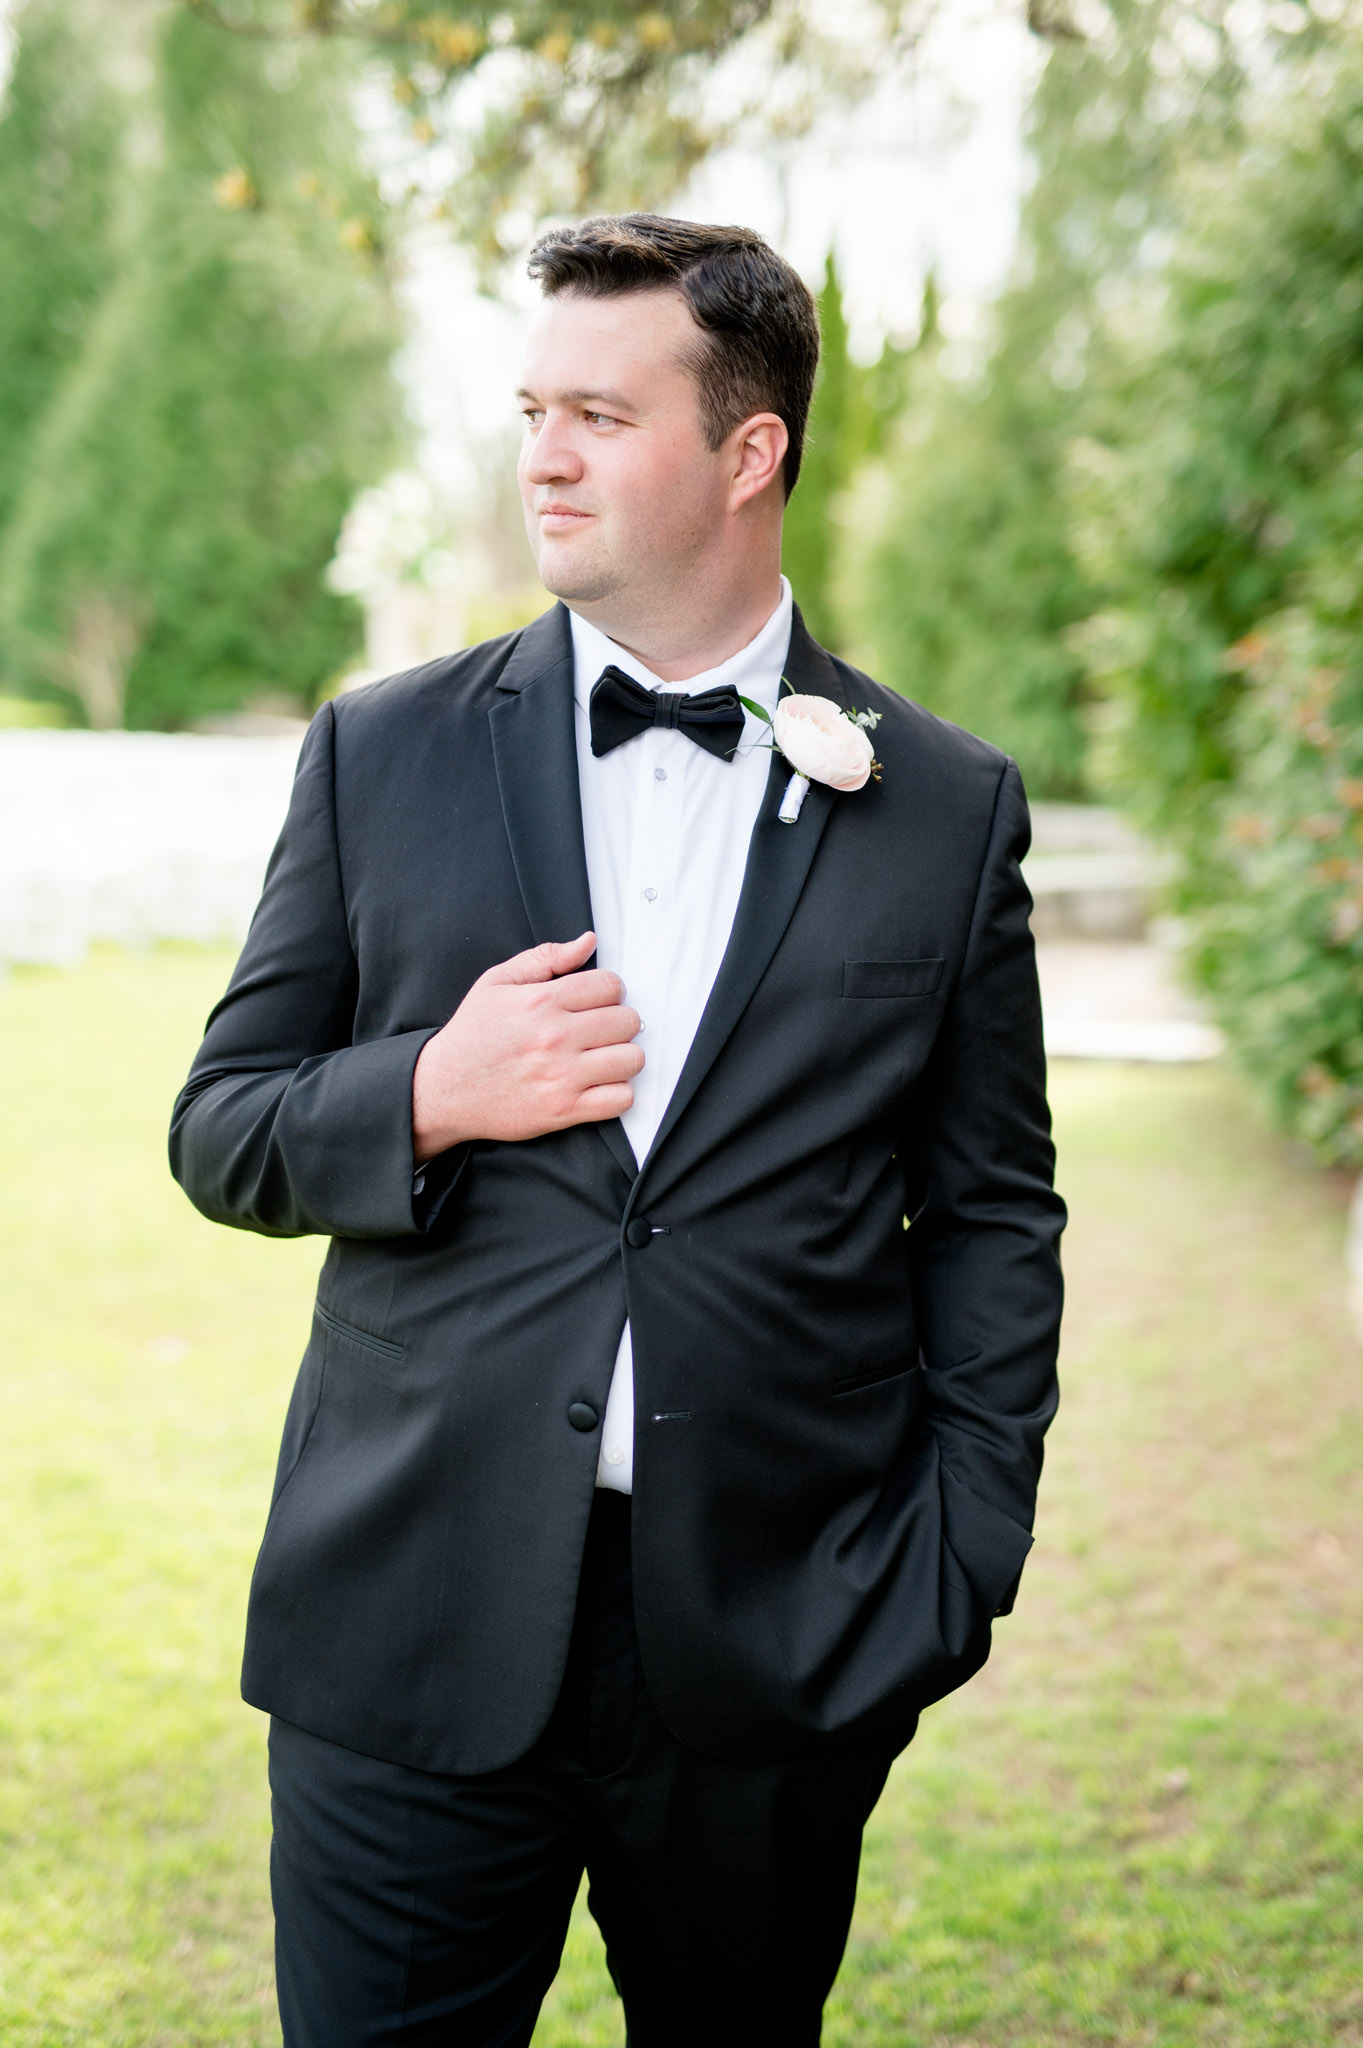 Groom holds lapel and looks over shoulder.